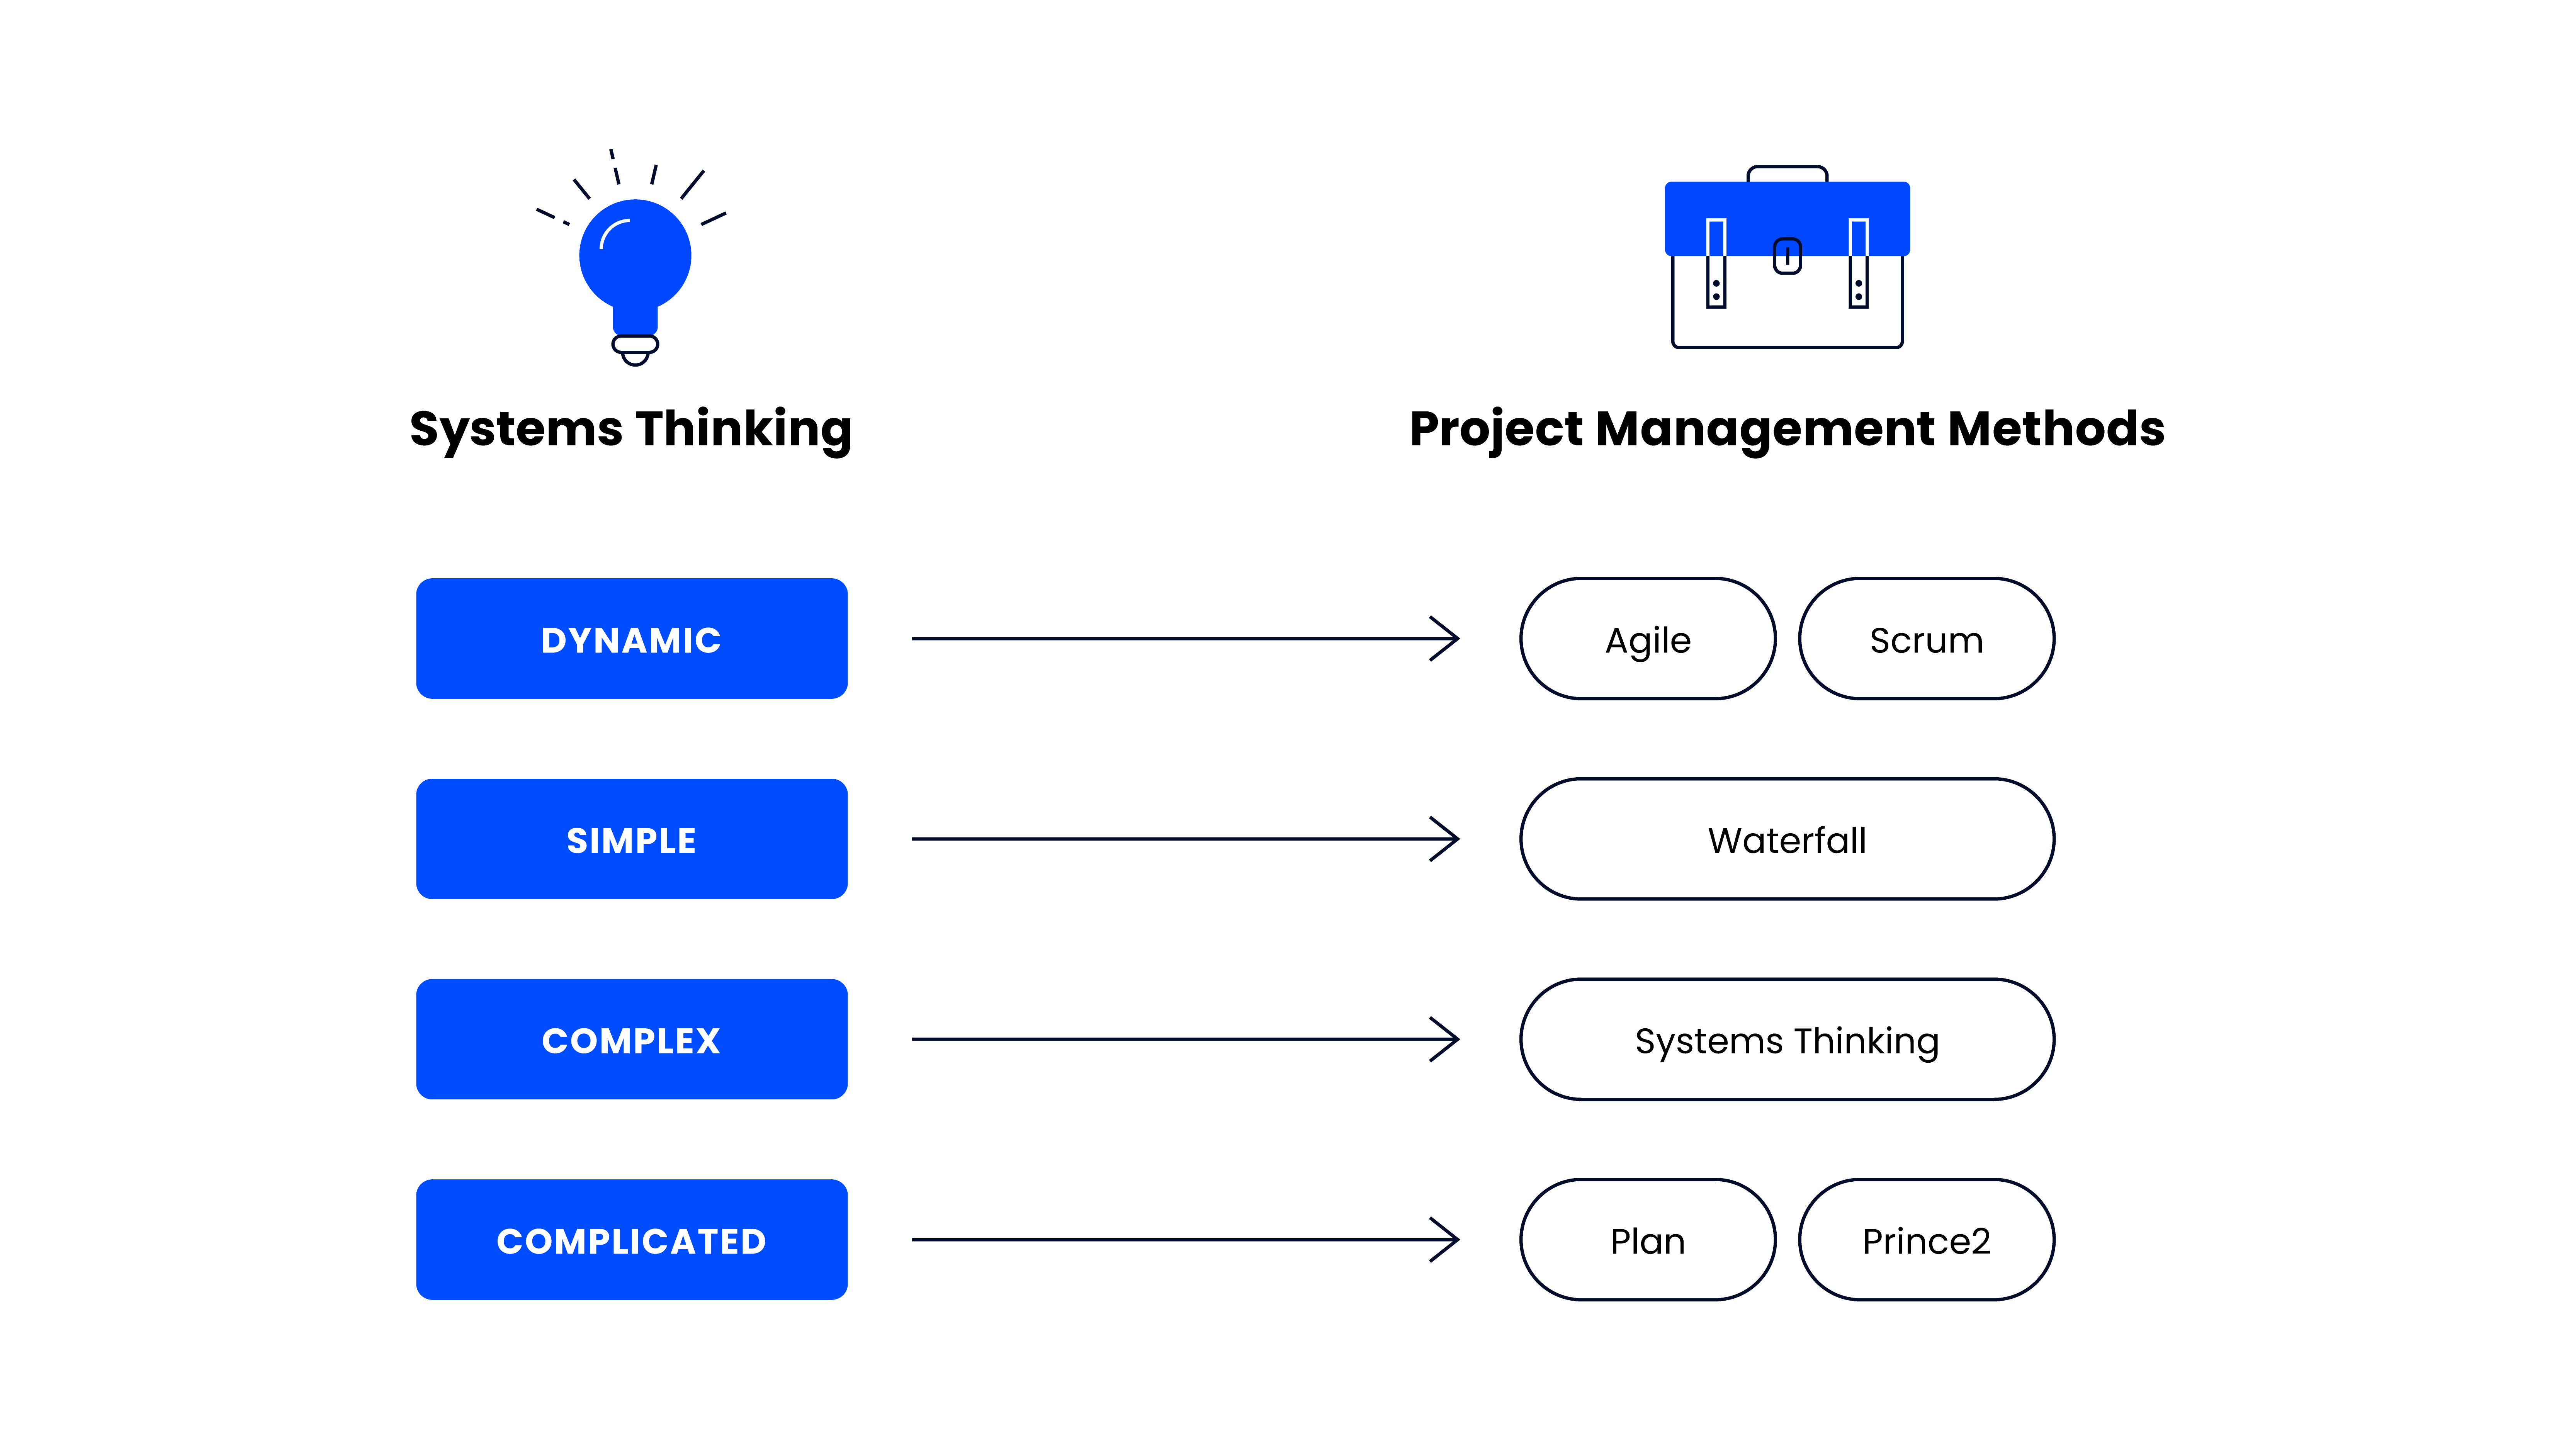 table comparing systems thinking modes to project management methods